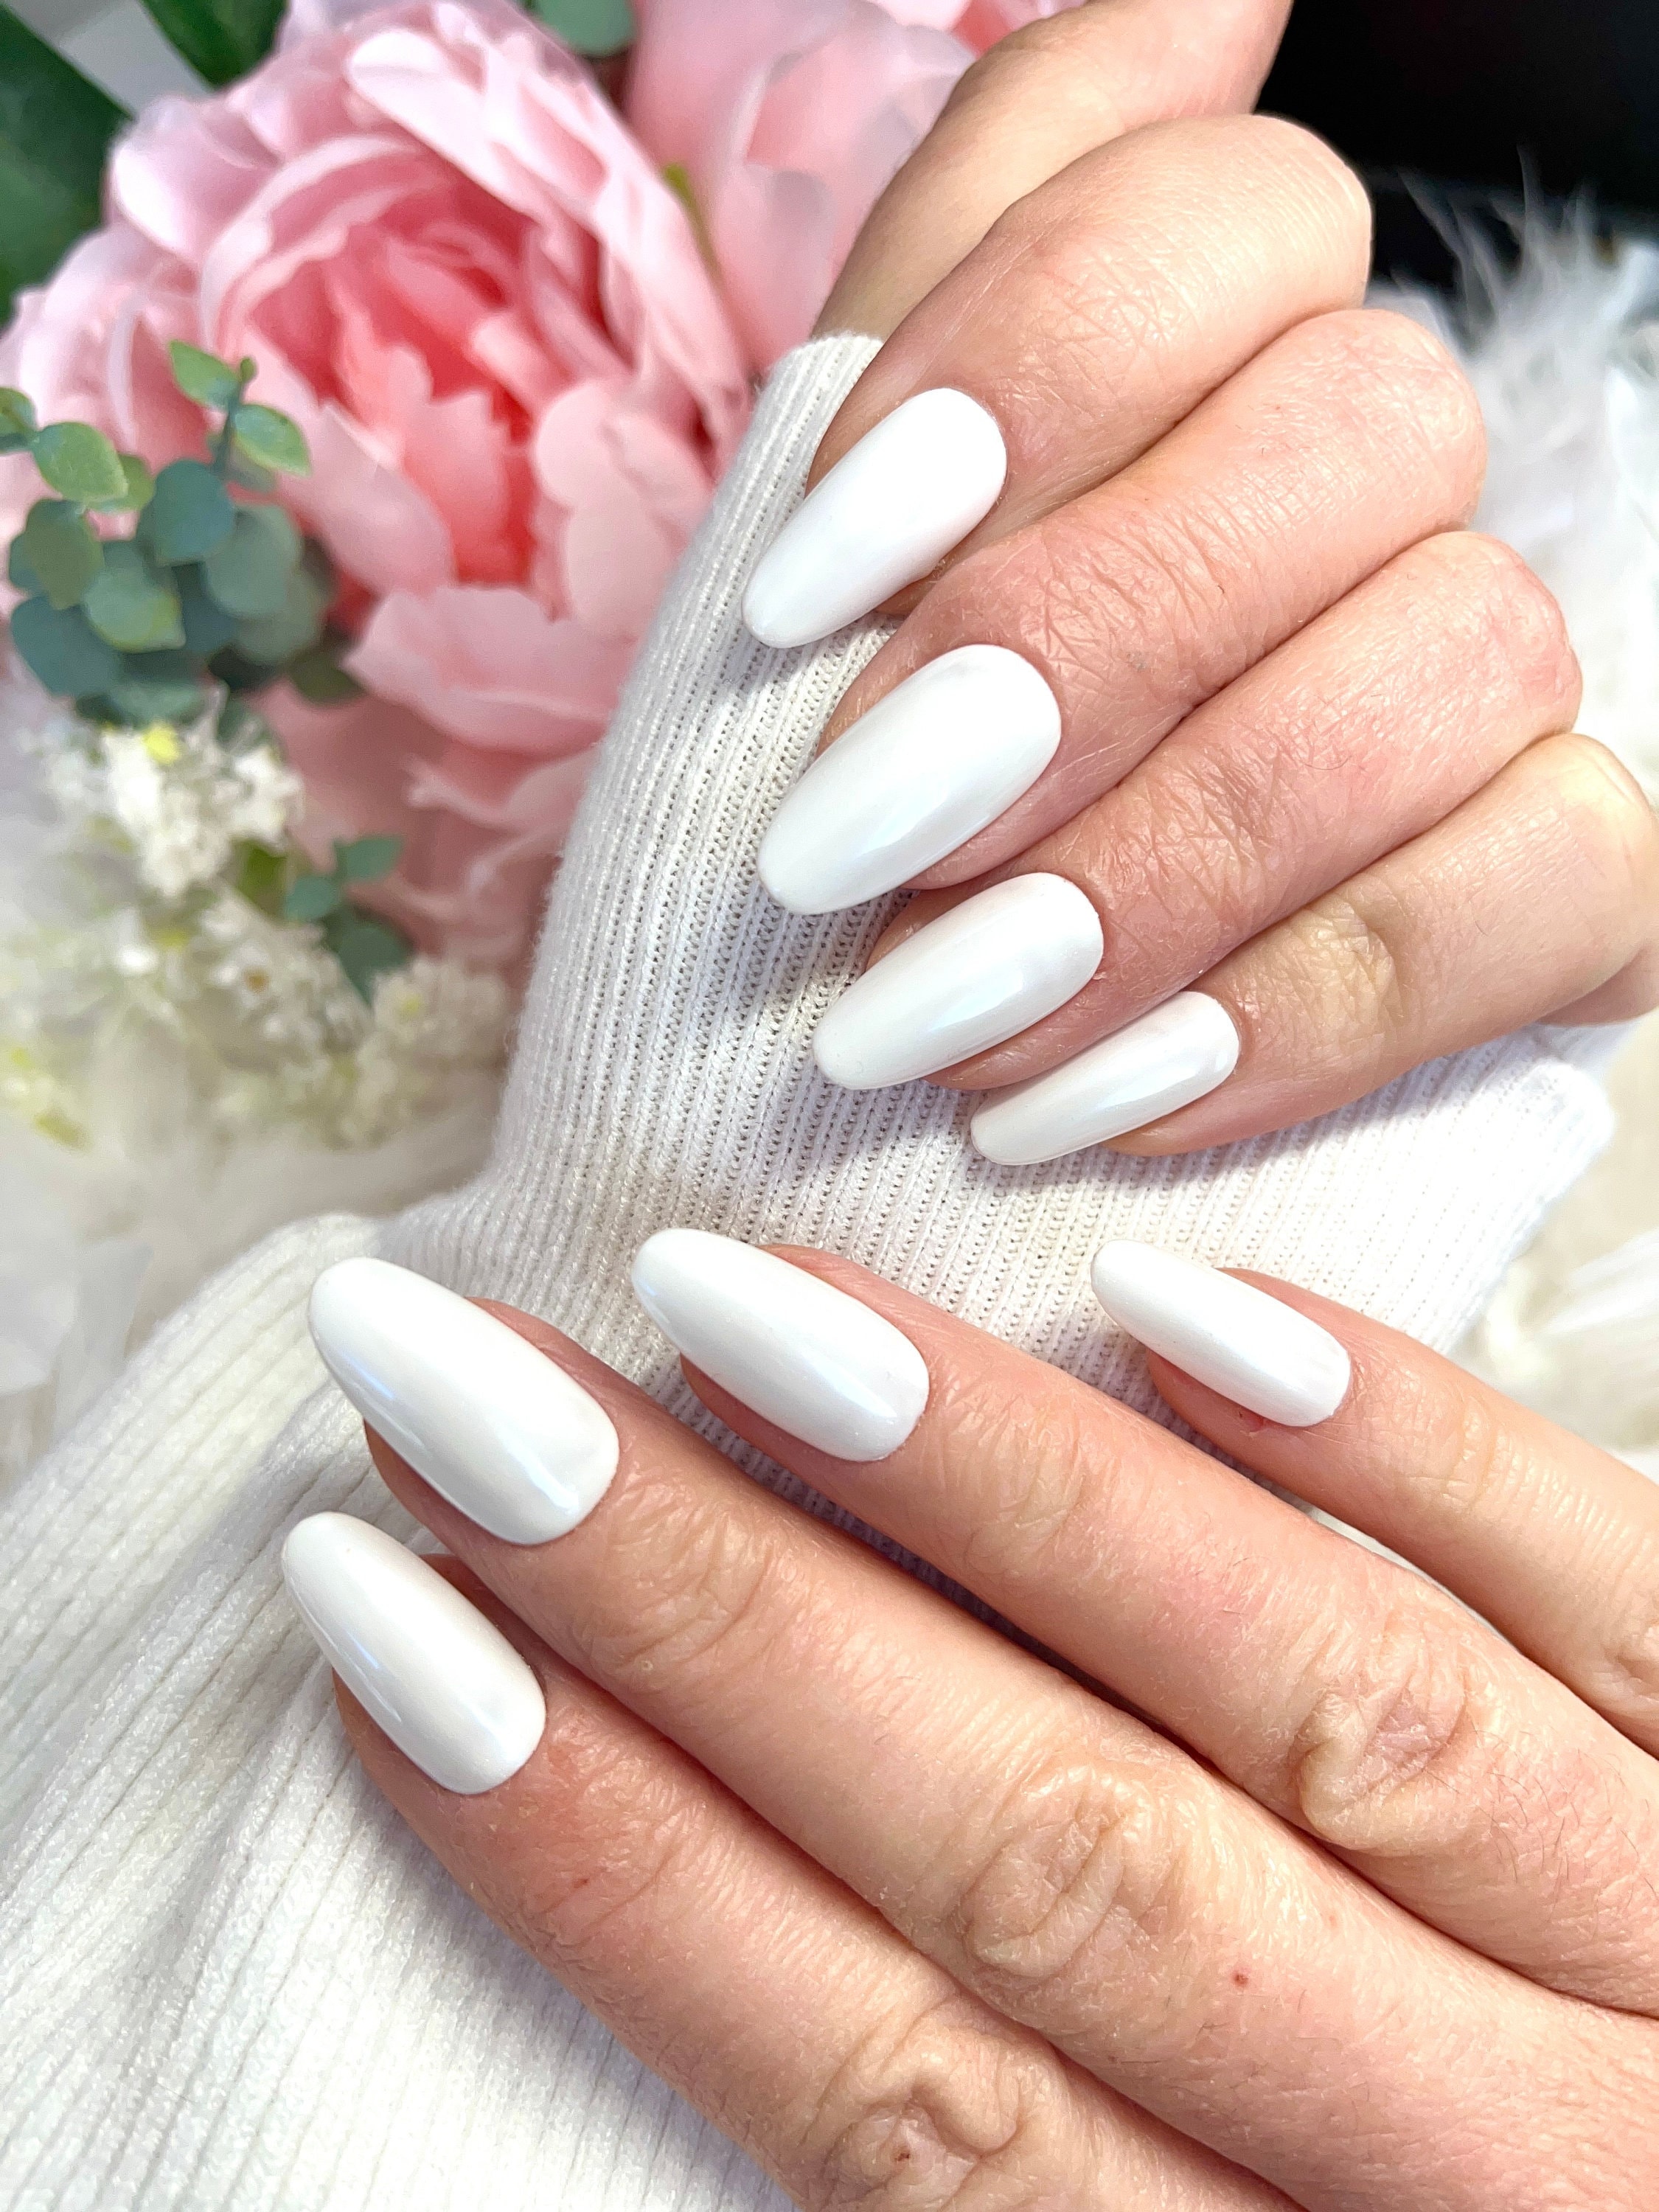 Buy AzoneeStar Press on Nails, 24 Pcs Medium French Tip Fake Nails Almond  Shape Acrylic Nails with Rhinestones Designs Full Cover White Nail Tips False  Nails Artificial Glossy Glue on Nails Online